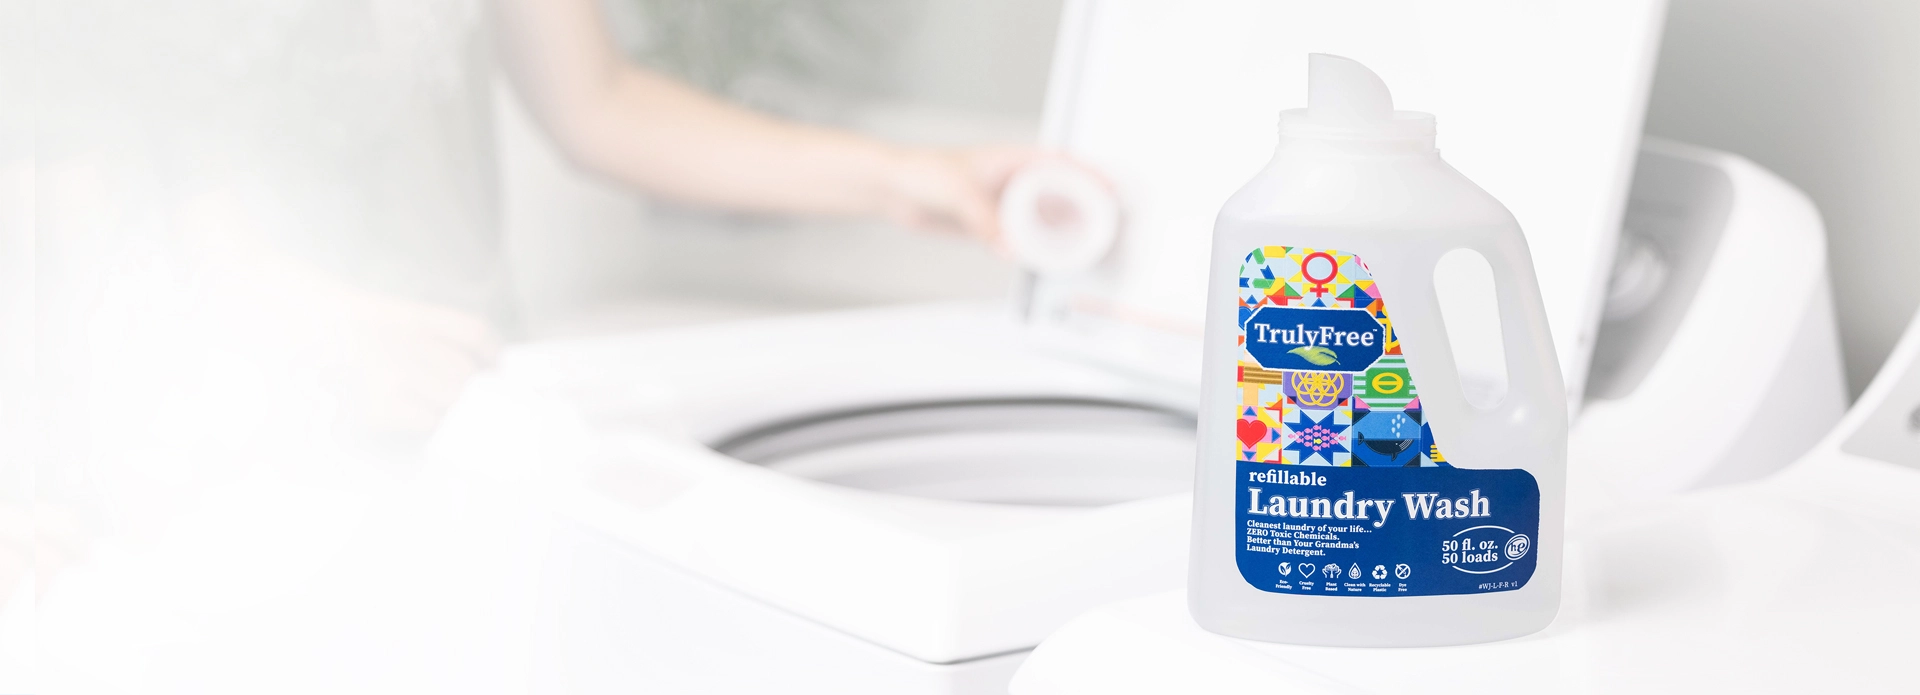 Truly Free laundry detergent